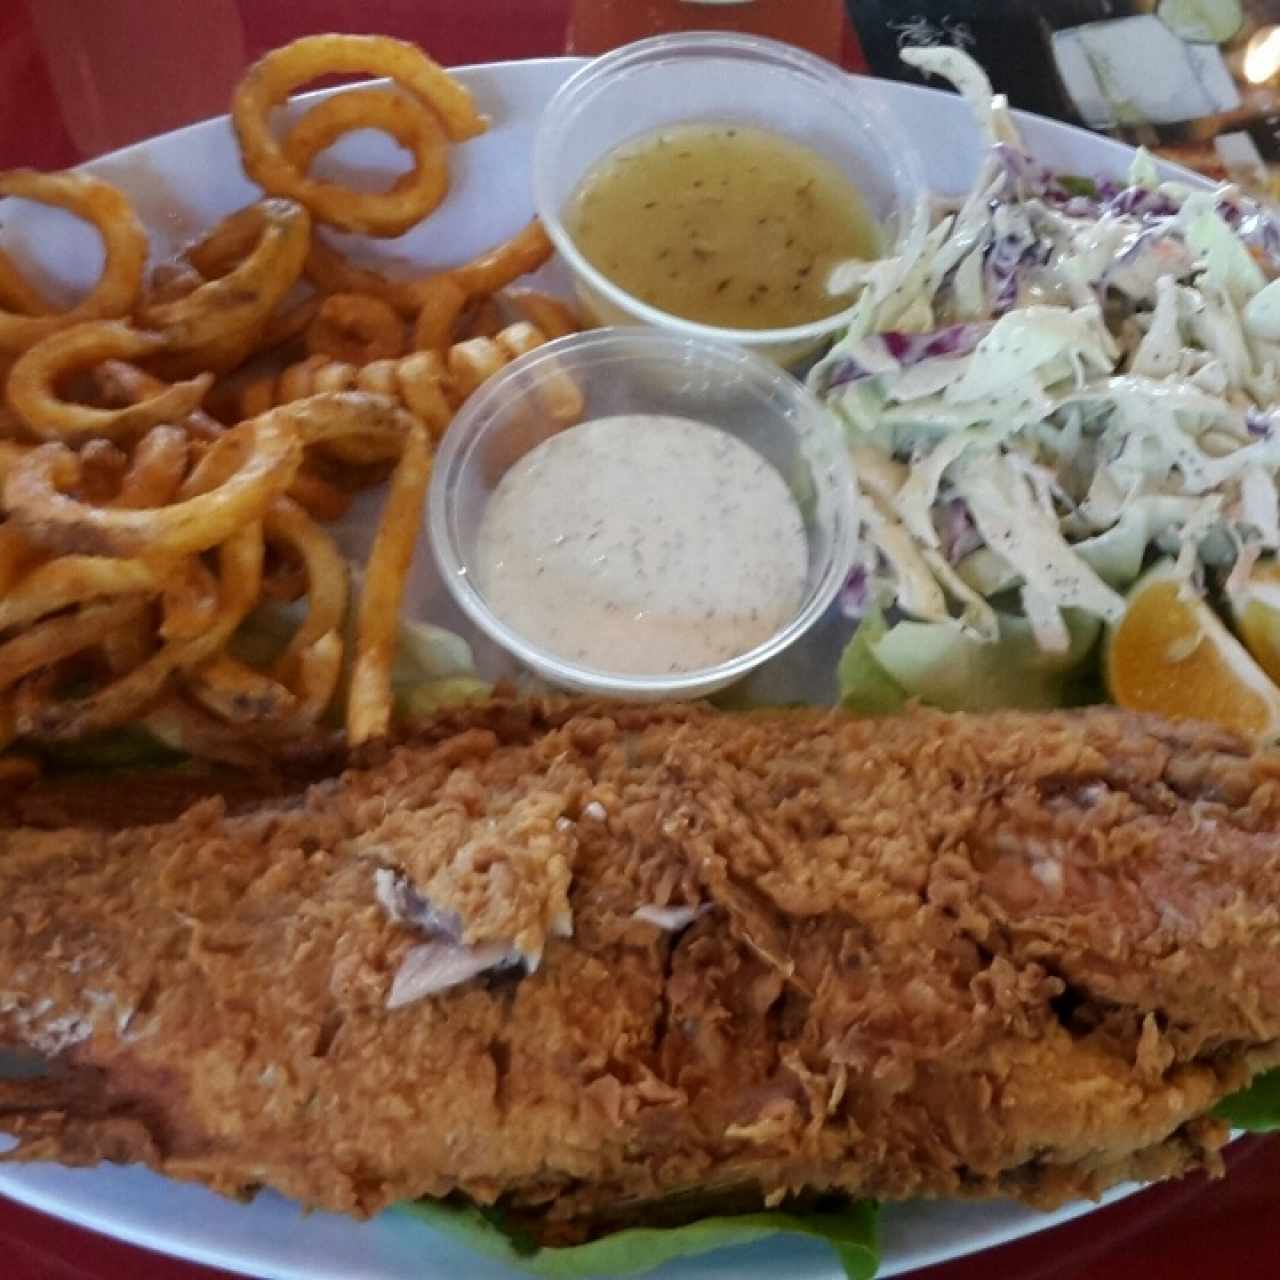 Red Snapper Fish with Curled French fries & Salad